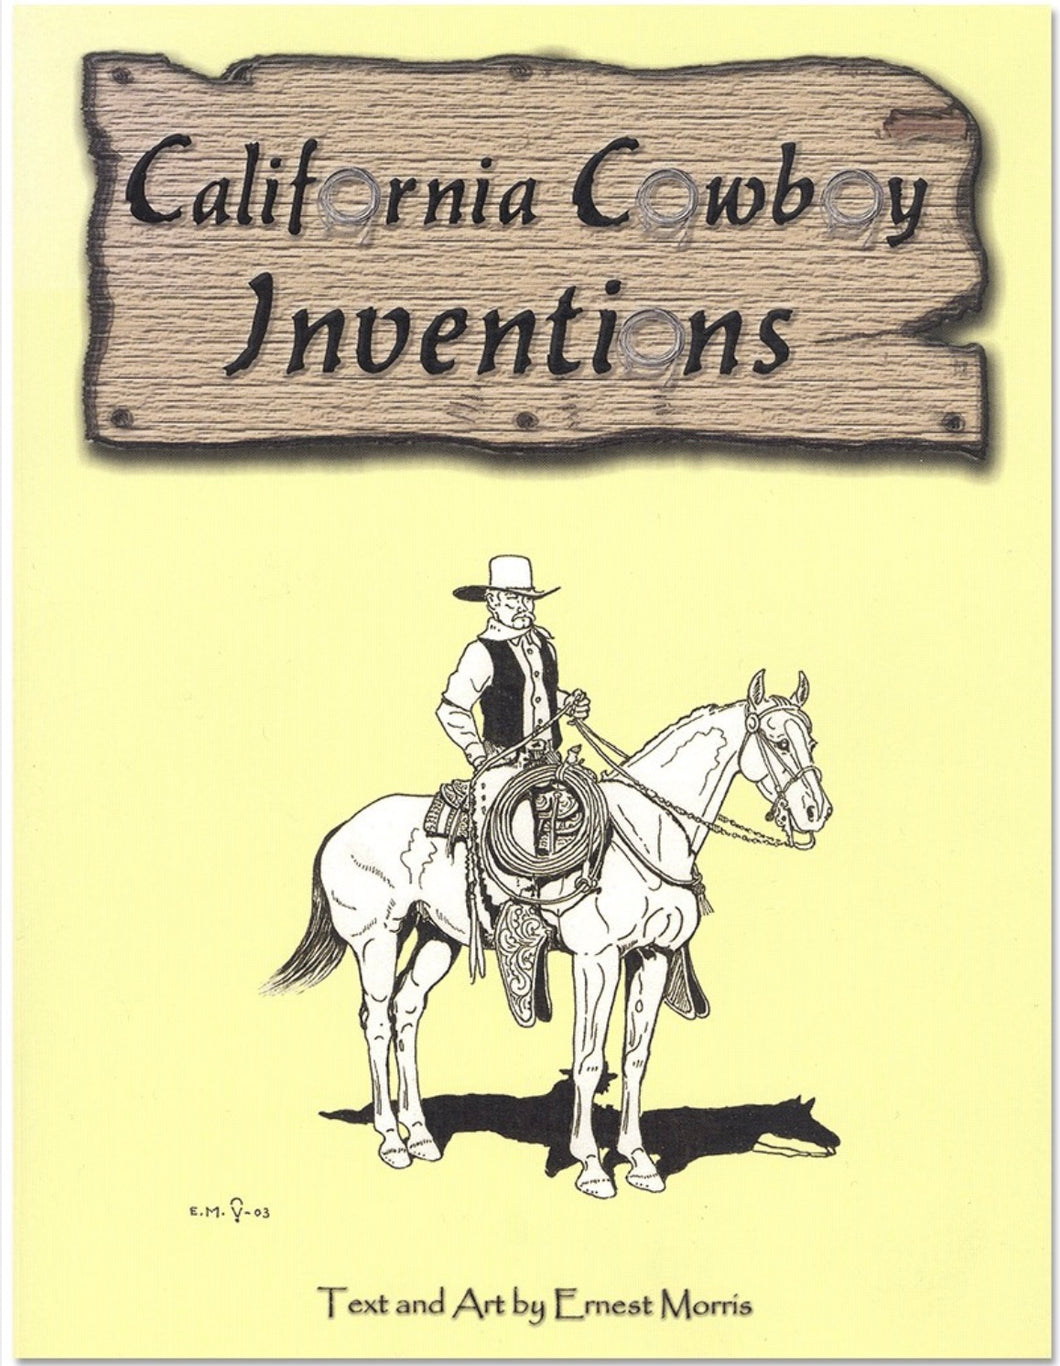 California Cowboy Inventions by Ernest Morris